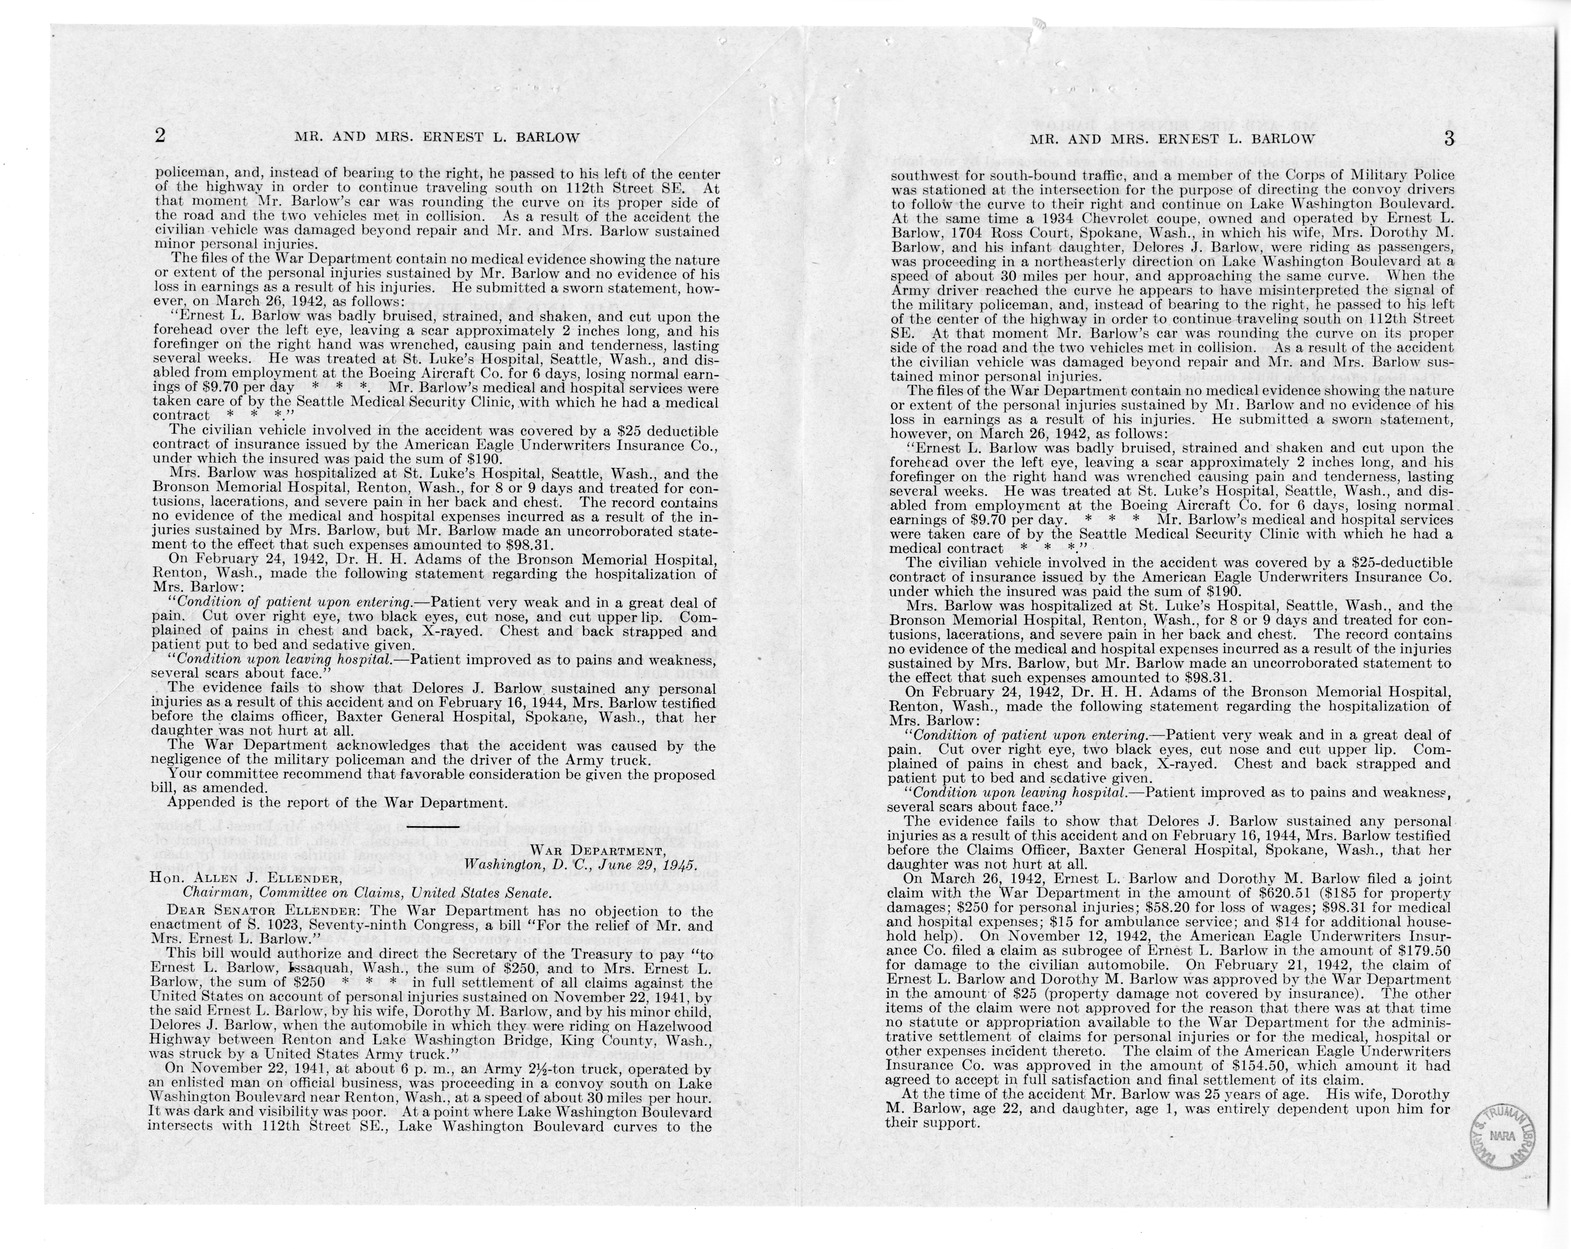 Memorandum from Frederick J. Bailey to M. C. Latta, S. 1023, For the Relief of Mr. and Mrs. Ernest L. Barlow, with Attachments